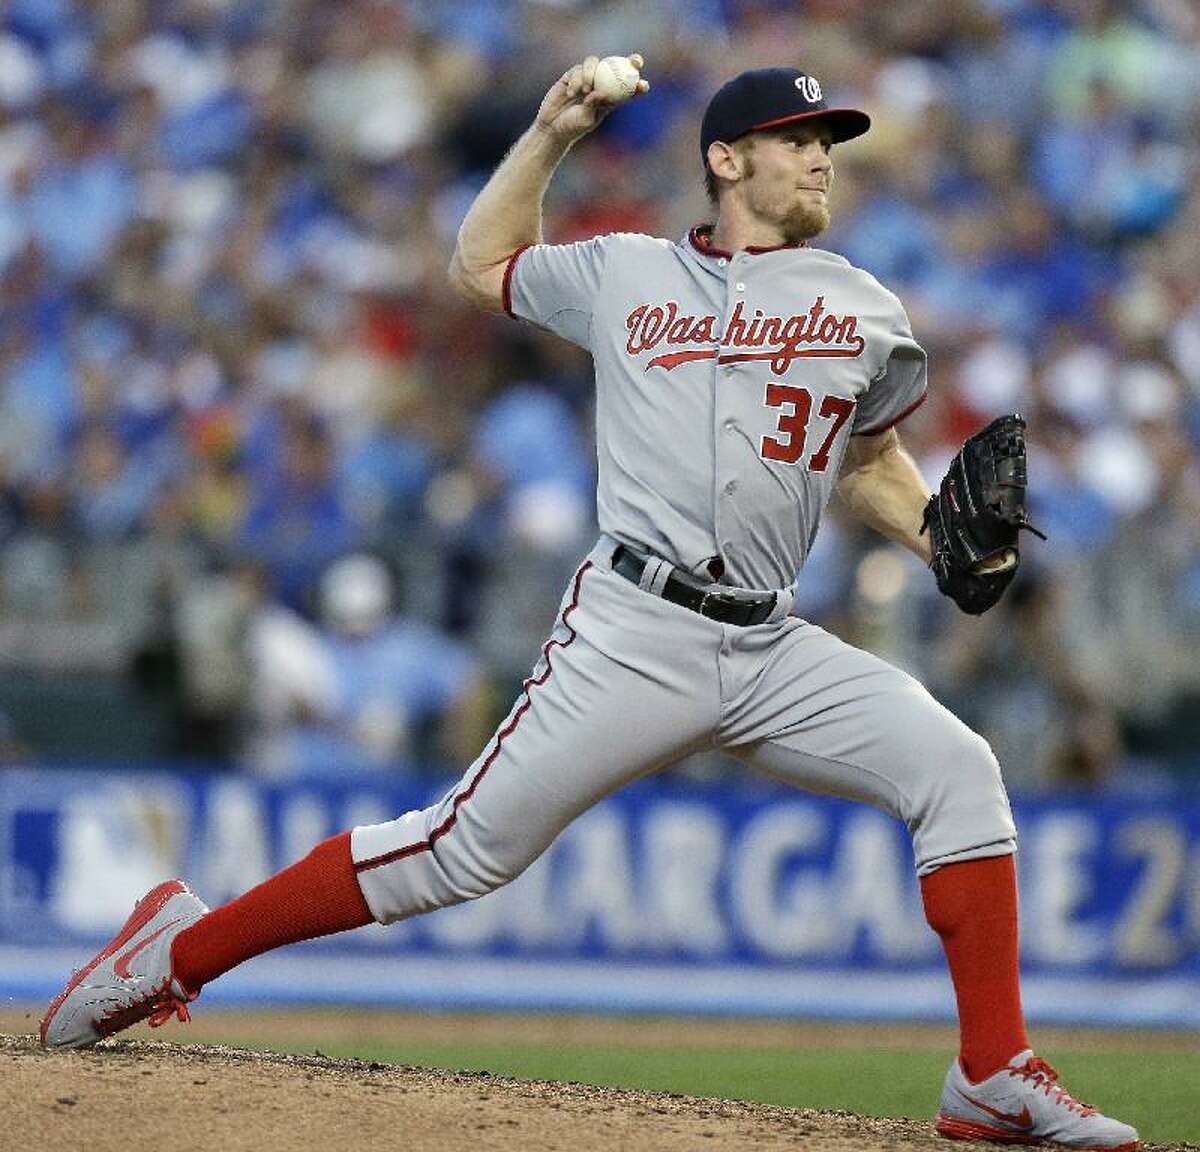 ASSOCIATED PRESS National League's Stephen Strasburg, of the Washington Nationals, delivers during the fifth inning of the MLB All-Star Game Tuesday in Kansas City, Mo. The Nationals may end up with a Strasburg dilemma if they stay in the race for the NL East title. The Nationals, who are in first place, have said they will shut Strasburg down before the end of the season.